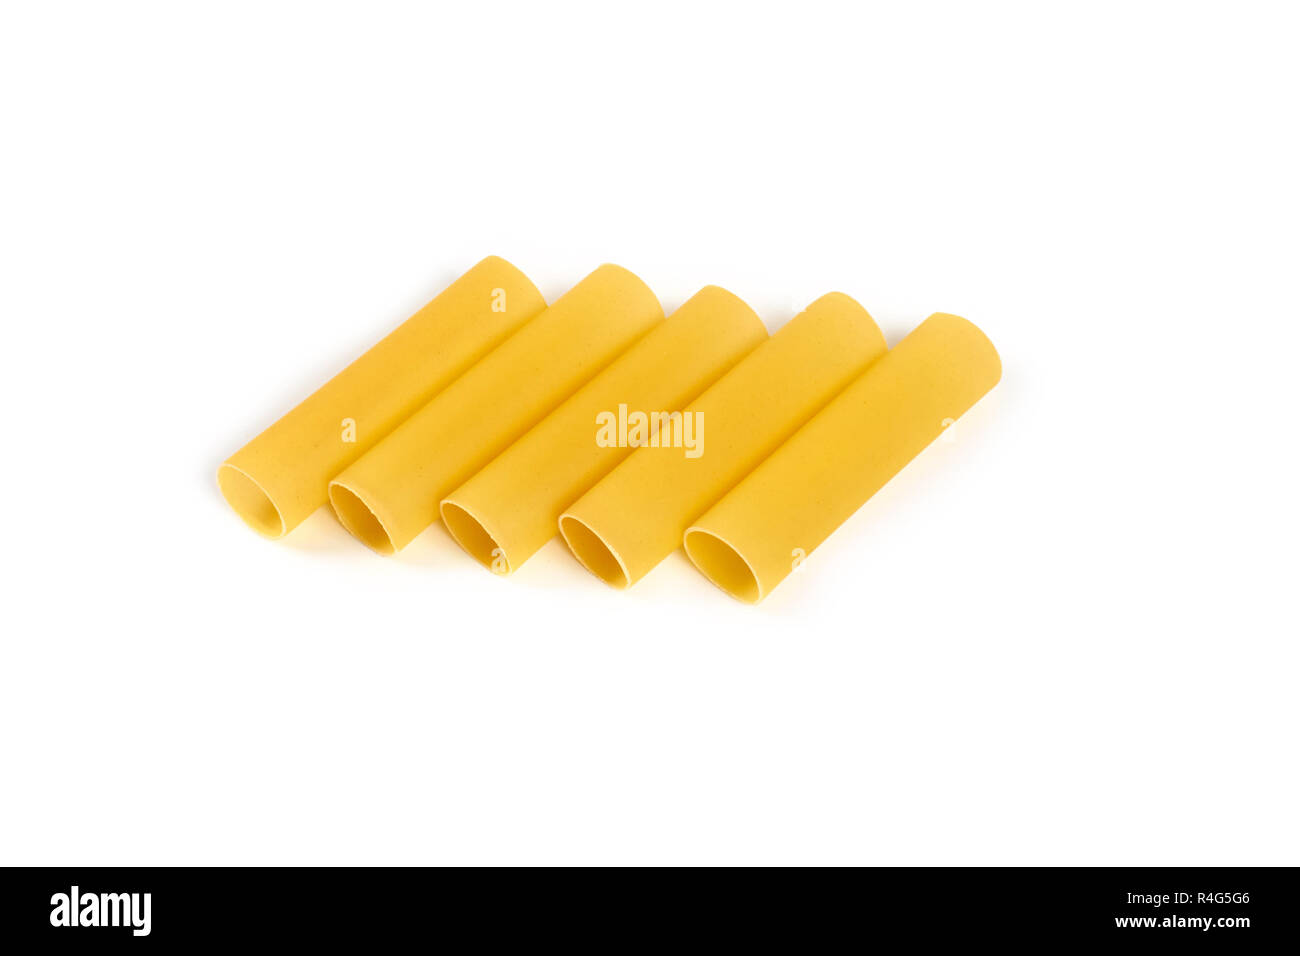 Italian cannelloni pasta tubes isolated over white background. Stock Photo